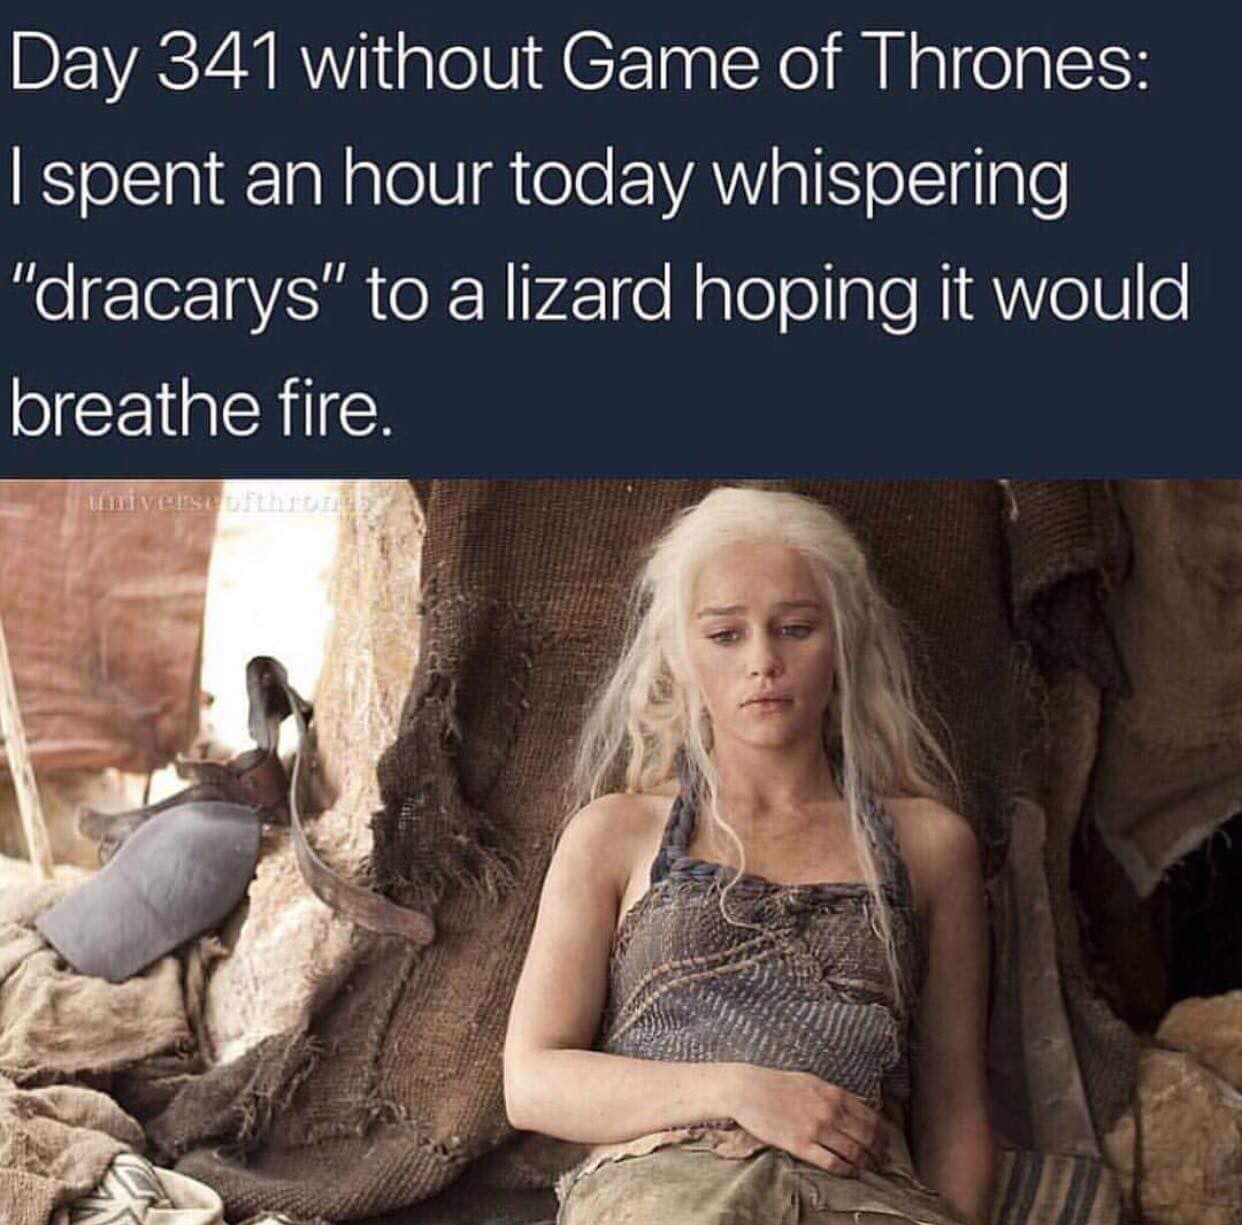 emilia clarke as daenerys targaryen - Day 341 without Game of Thrones I spent an hour today whispering "dracarys" to a lizard hoping it would breathe fire. Un Vise